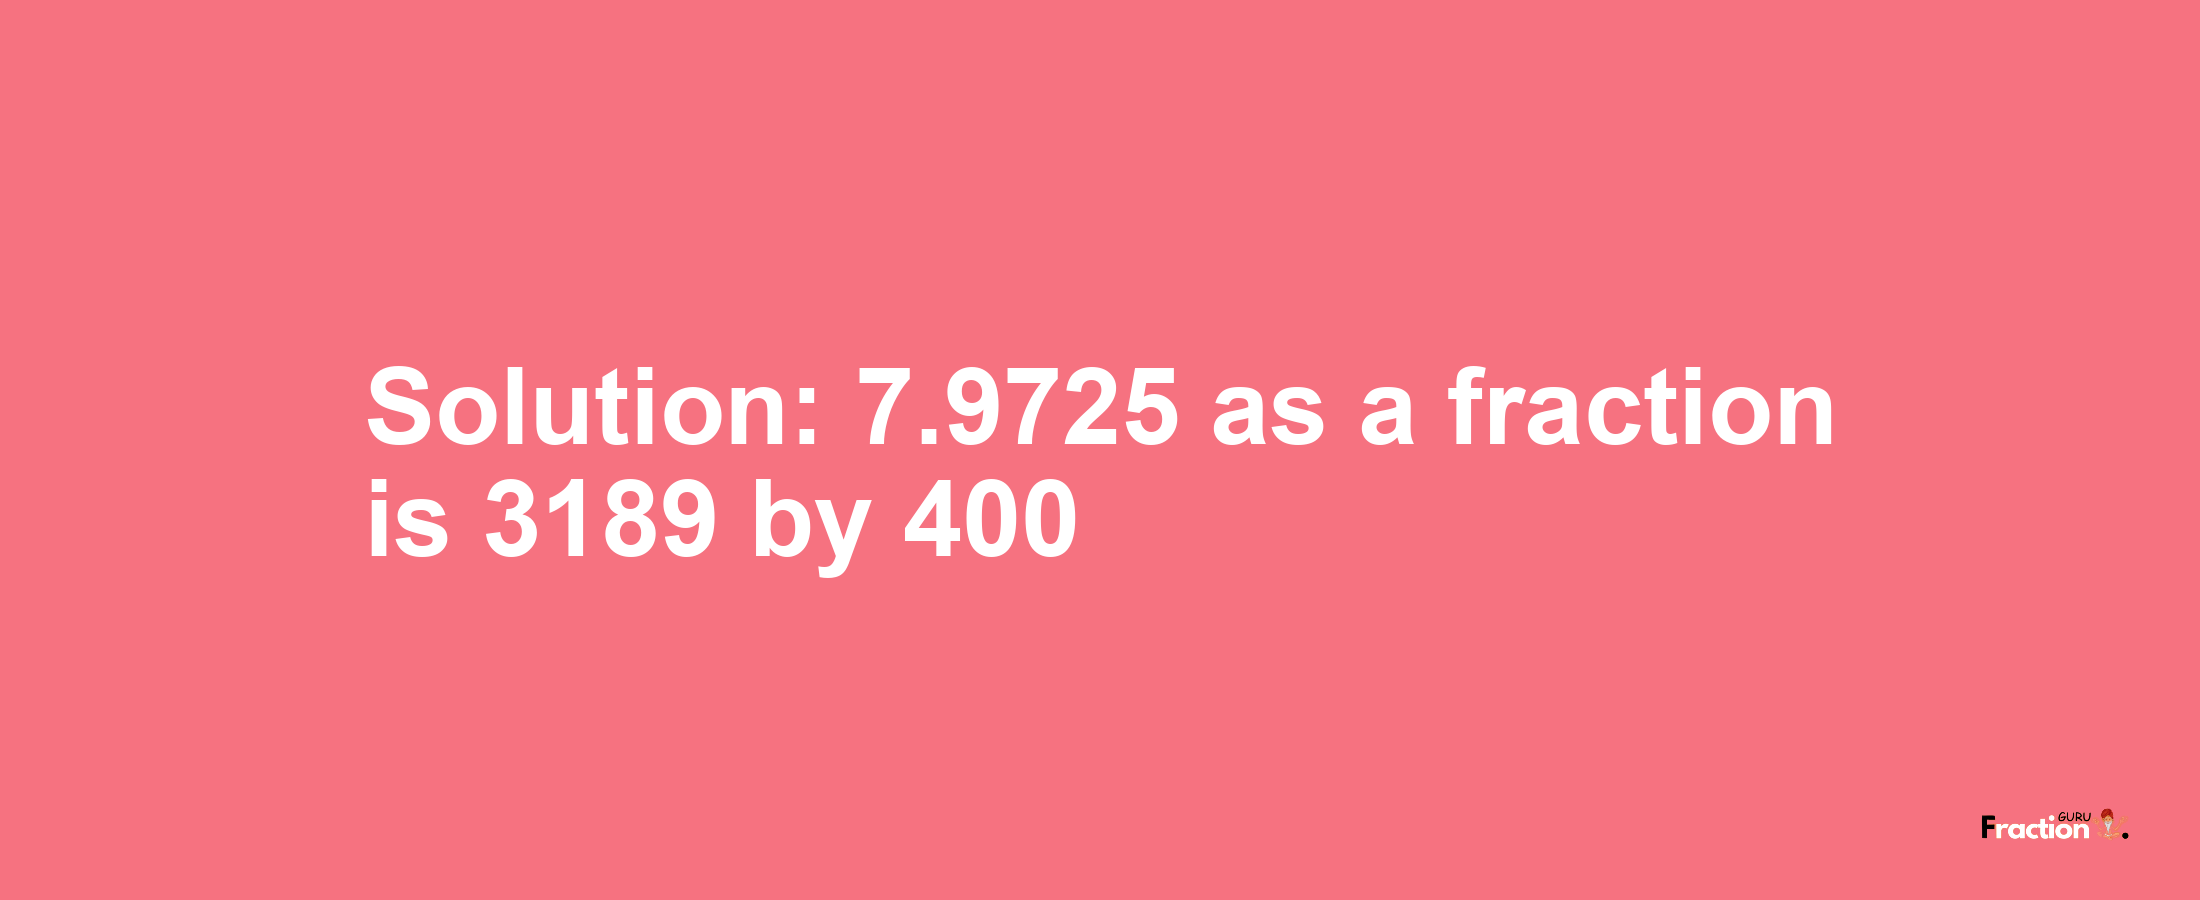 Solution:7.9725 as a fraction is 3189/400